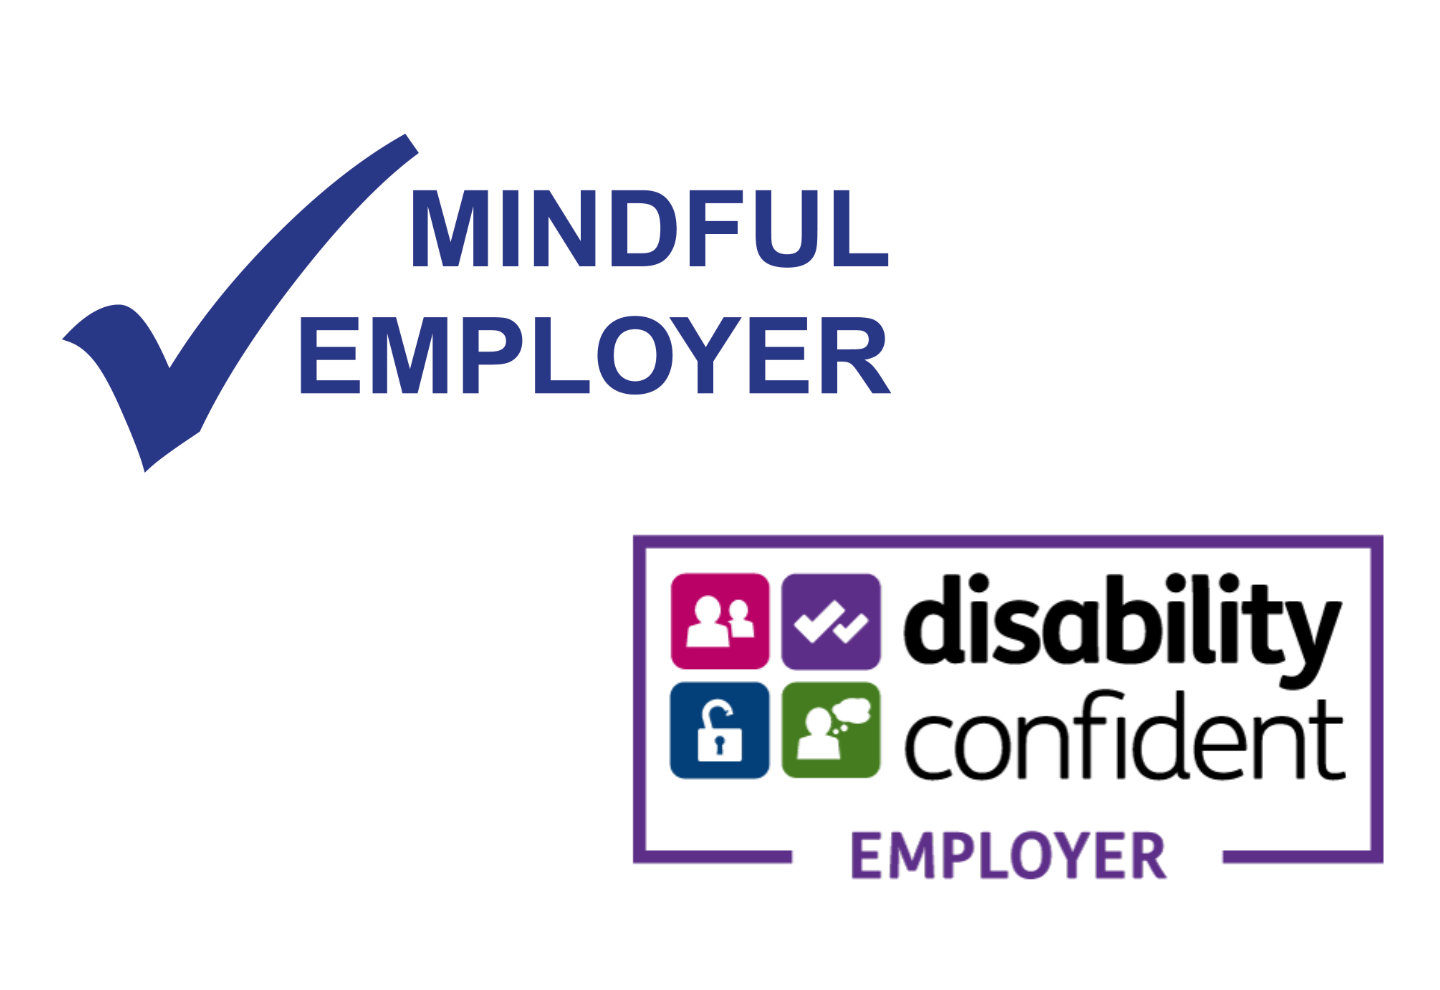 Mindful Employer and Disability Confident logos